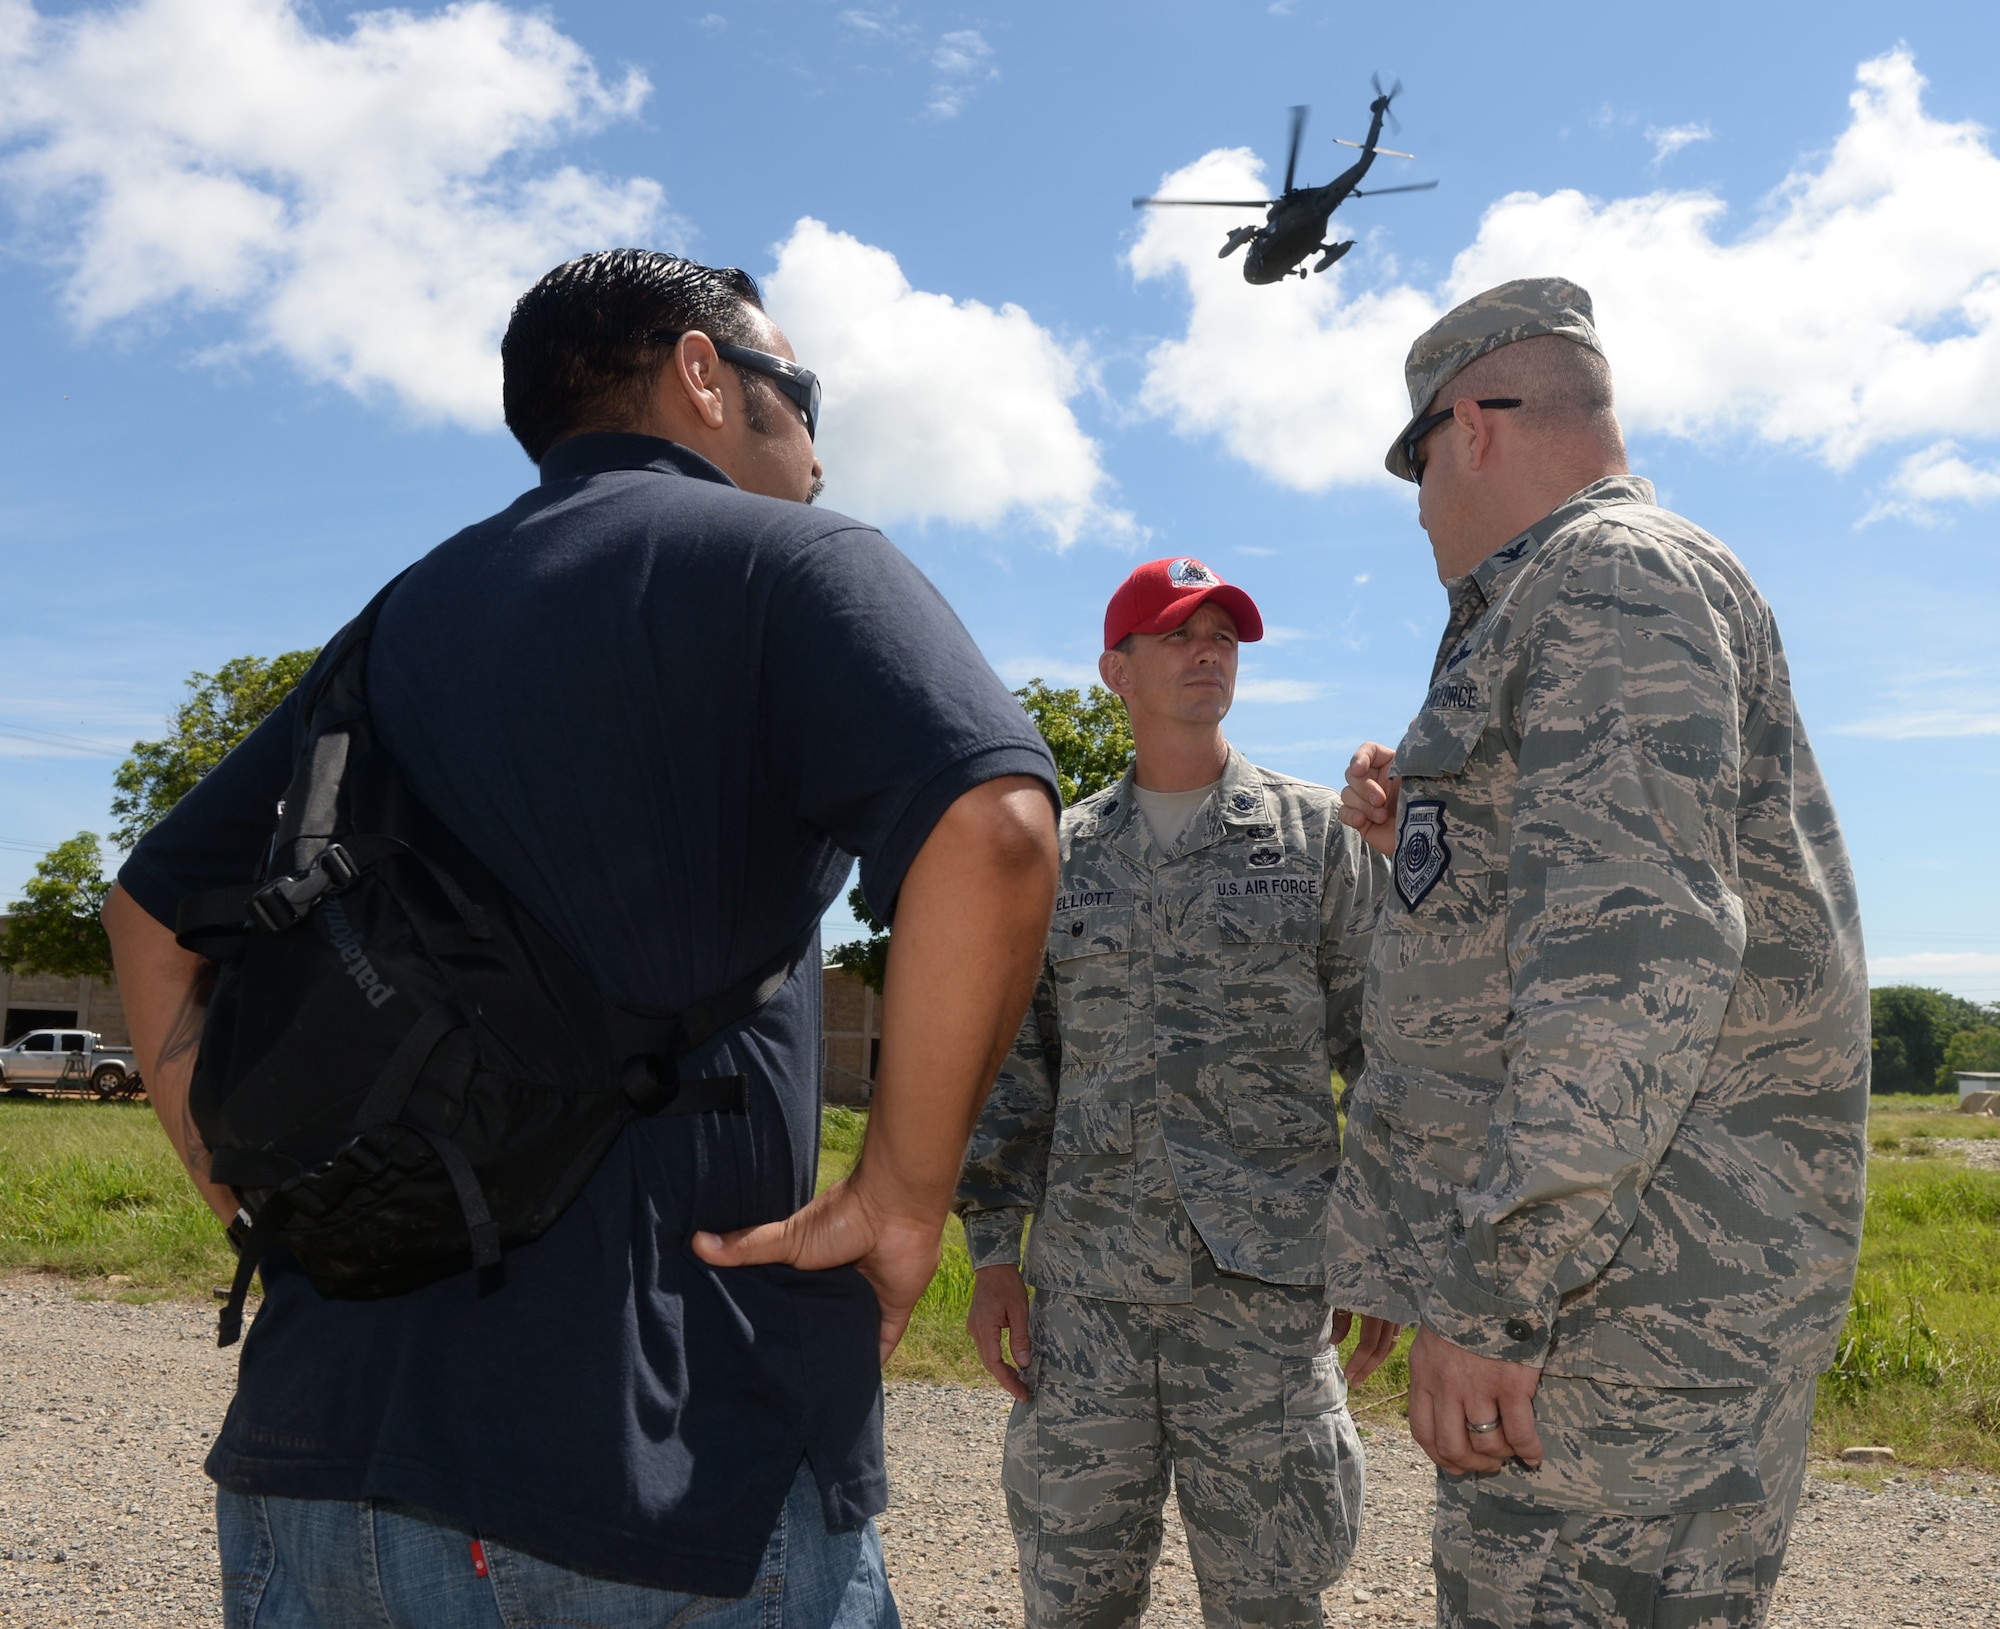 U.S. Air Force Col. James Sheedy, 474th Air Expeditionary Group and 612th Theater Operations Group commander, talks with U.S. Air Force Lt. Col. Ryan Elliott, 823rd RED HORSE Squadron commander and NEW HORIZONS Honduras 2015 exercise commander, out of Hurlburt Field, Fla., at the Puerto Castillo Naval Base in Trujillo, Honduras, June 10, 2015. Sheedy oversees THE NEW HORIZONS exercise and visited exercise personnel at the Honduras Aguan well, Gabriela Mistral primary school construction site, and Dr. Salvador Paredos Hospital. “Whenever one of these operations comes up to the command and control chain that have to attach it to a unit or build a unit, we have a unit, the 474th Air Expeditionary Group, to I get to be the commander and oversee the command and control,” said Sheedy.  Sheedy also visited exercise personnel at the Honduras Aguan well site, Gabriela Mistral primary school construction site, and saw the Dr. Salvador Paredos Hospital. Launched in the 1980’s, NEW HORIZONS is an annual joint humanitarian assistance exercise conducted by U.S. Southern Command with a partner nation in Central America, South America or the Caribbean. The exercise improves joint readiness training of U.S. and partner nation civil engineers, medical professionals and support personnel.  (U.S. Air Force photo by Capt. David J. Murphy/Released)